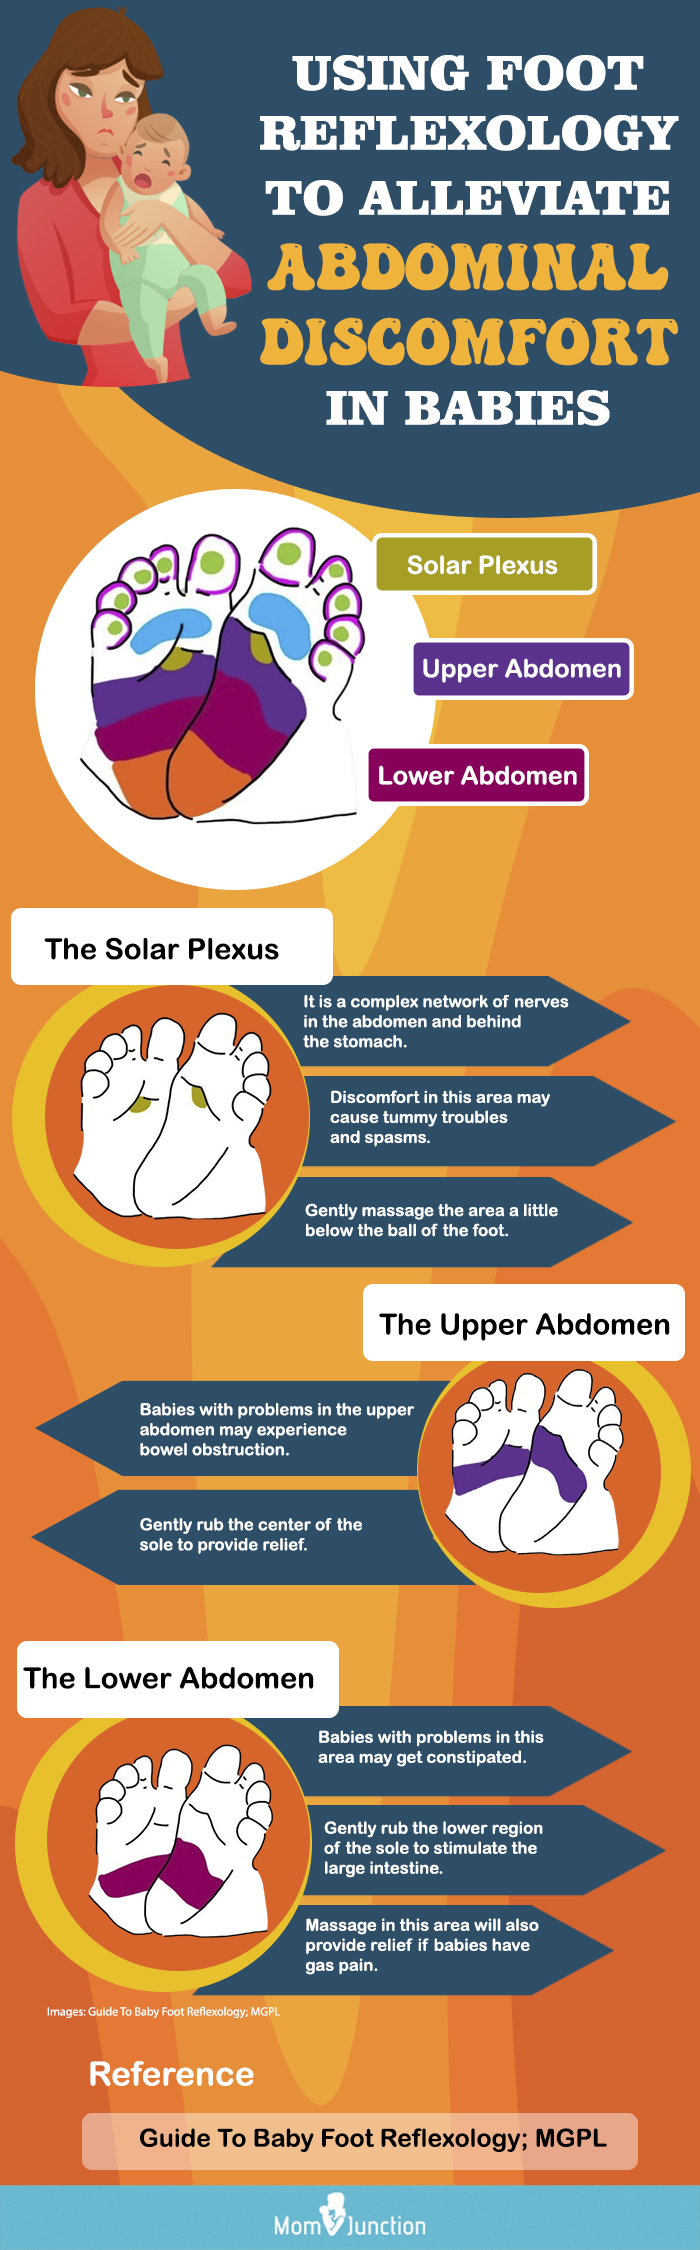 reflexology to relieve gas pain in babies (infographic)